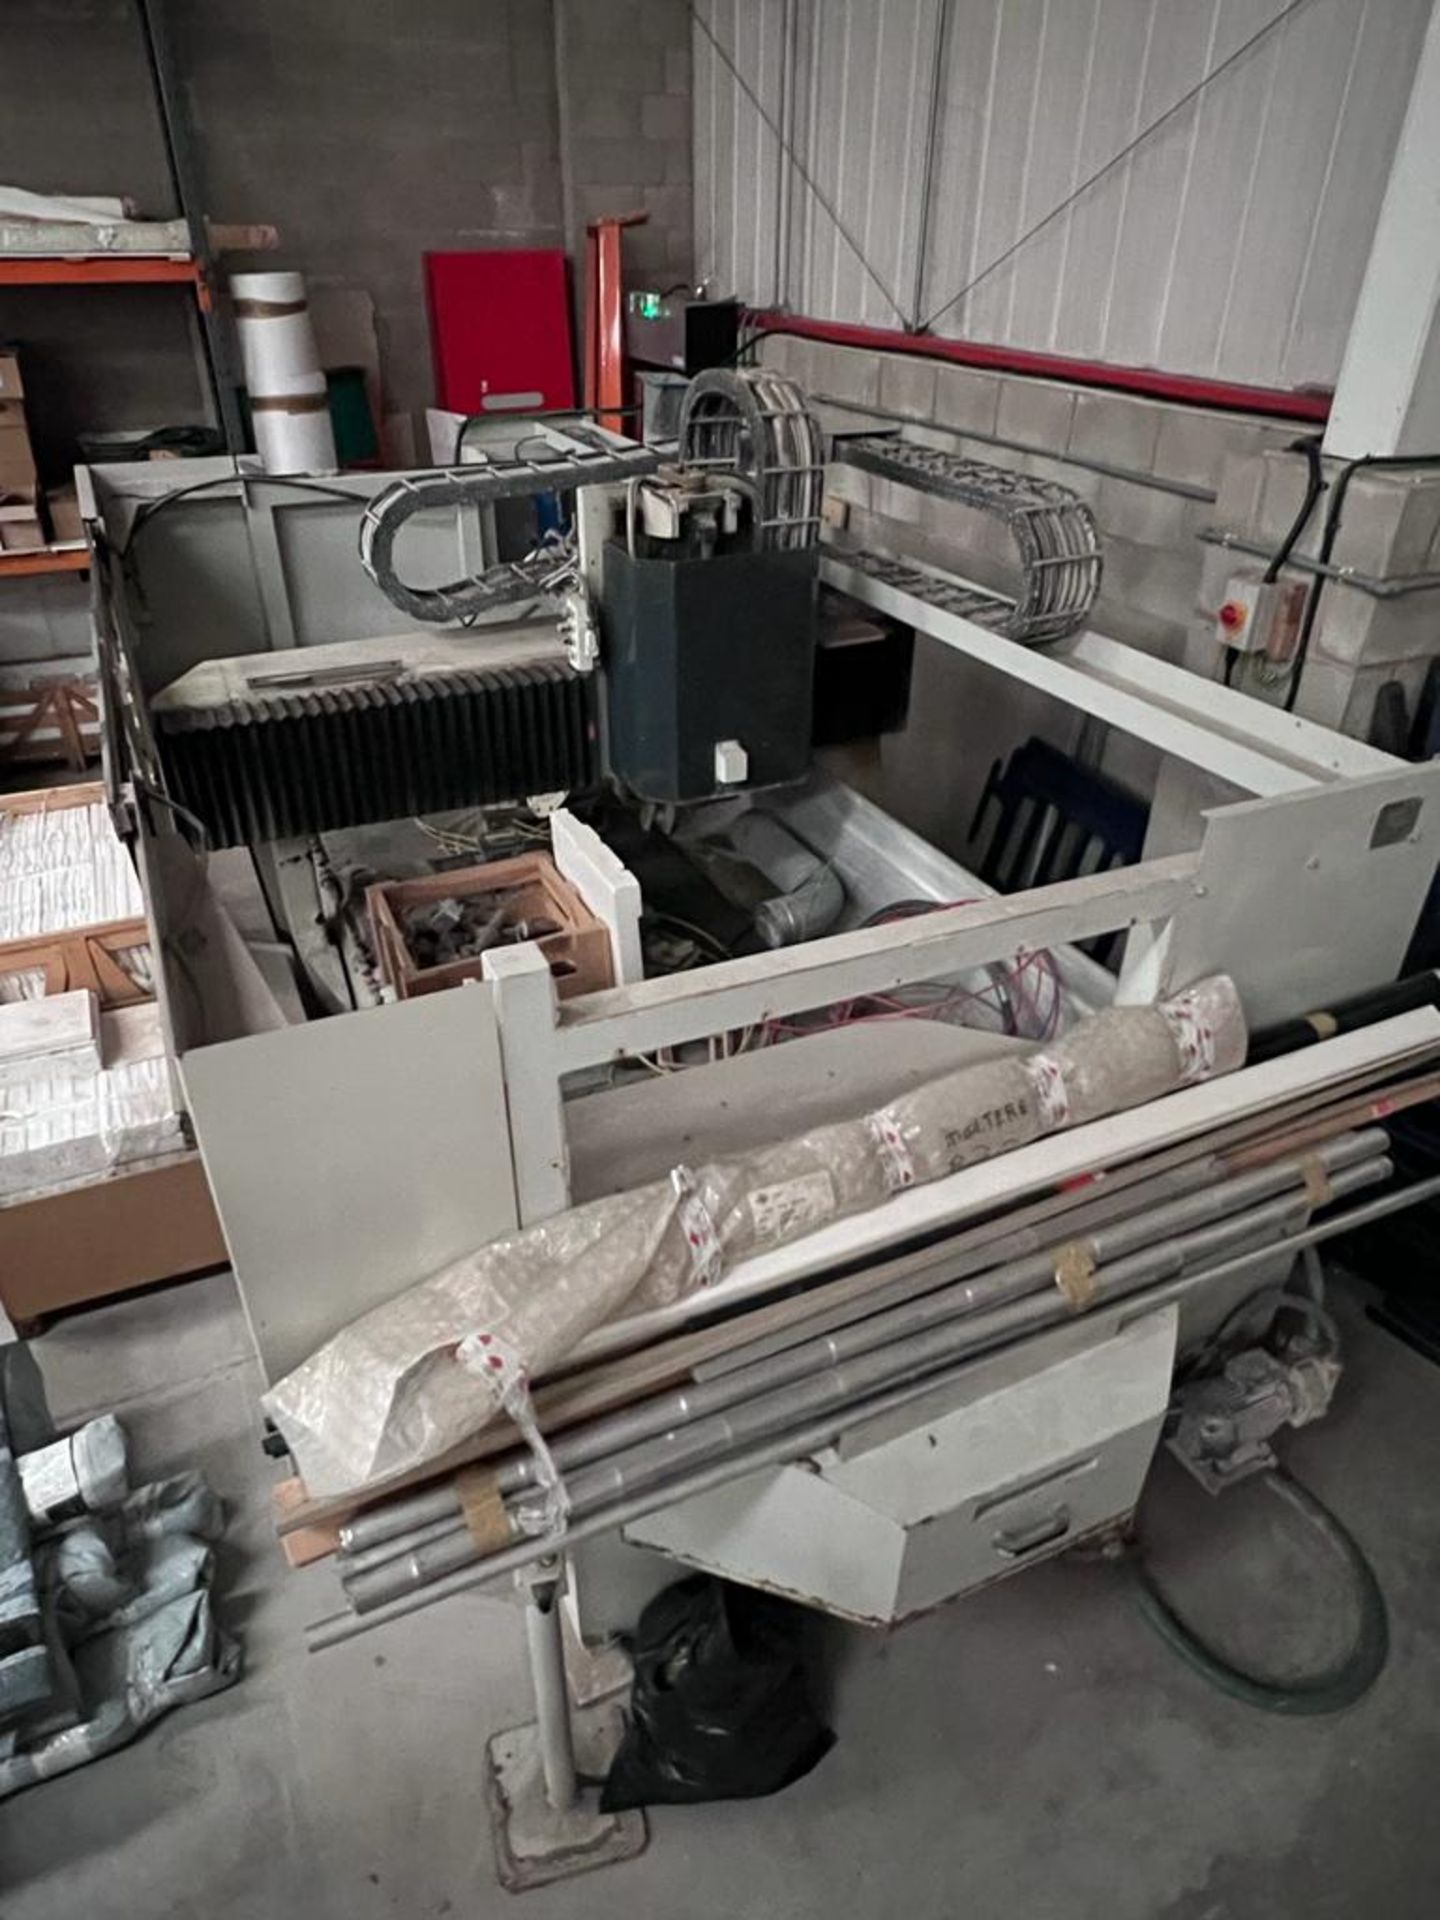 Intermac Compact Stone CNC Machine serial no. 90775 with a Broomwade Refrigerated Dryer, - Image 4 of 10